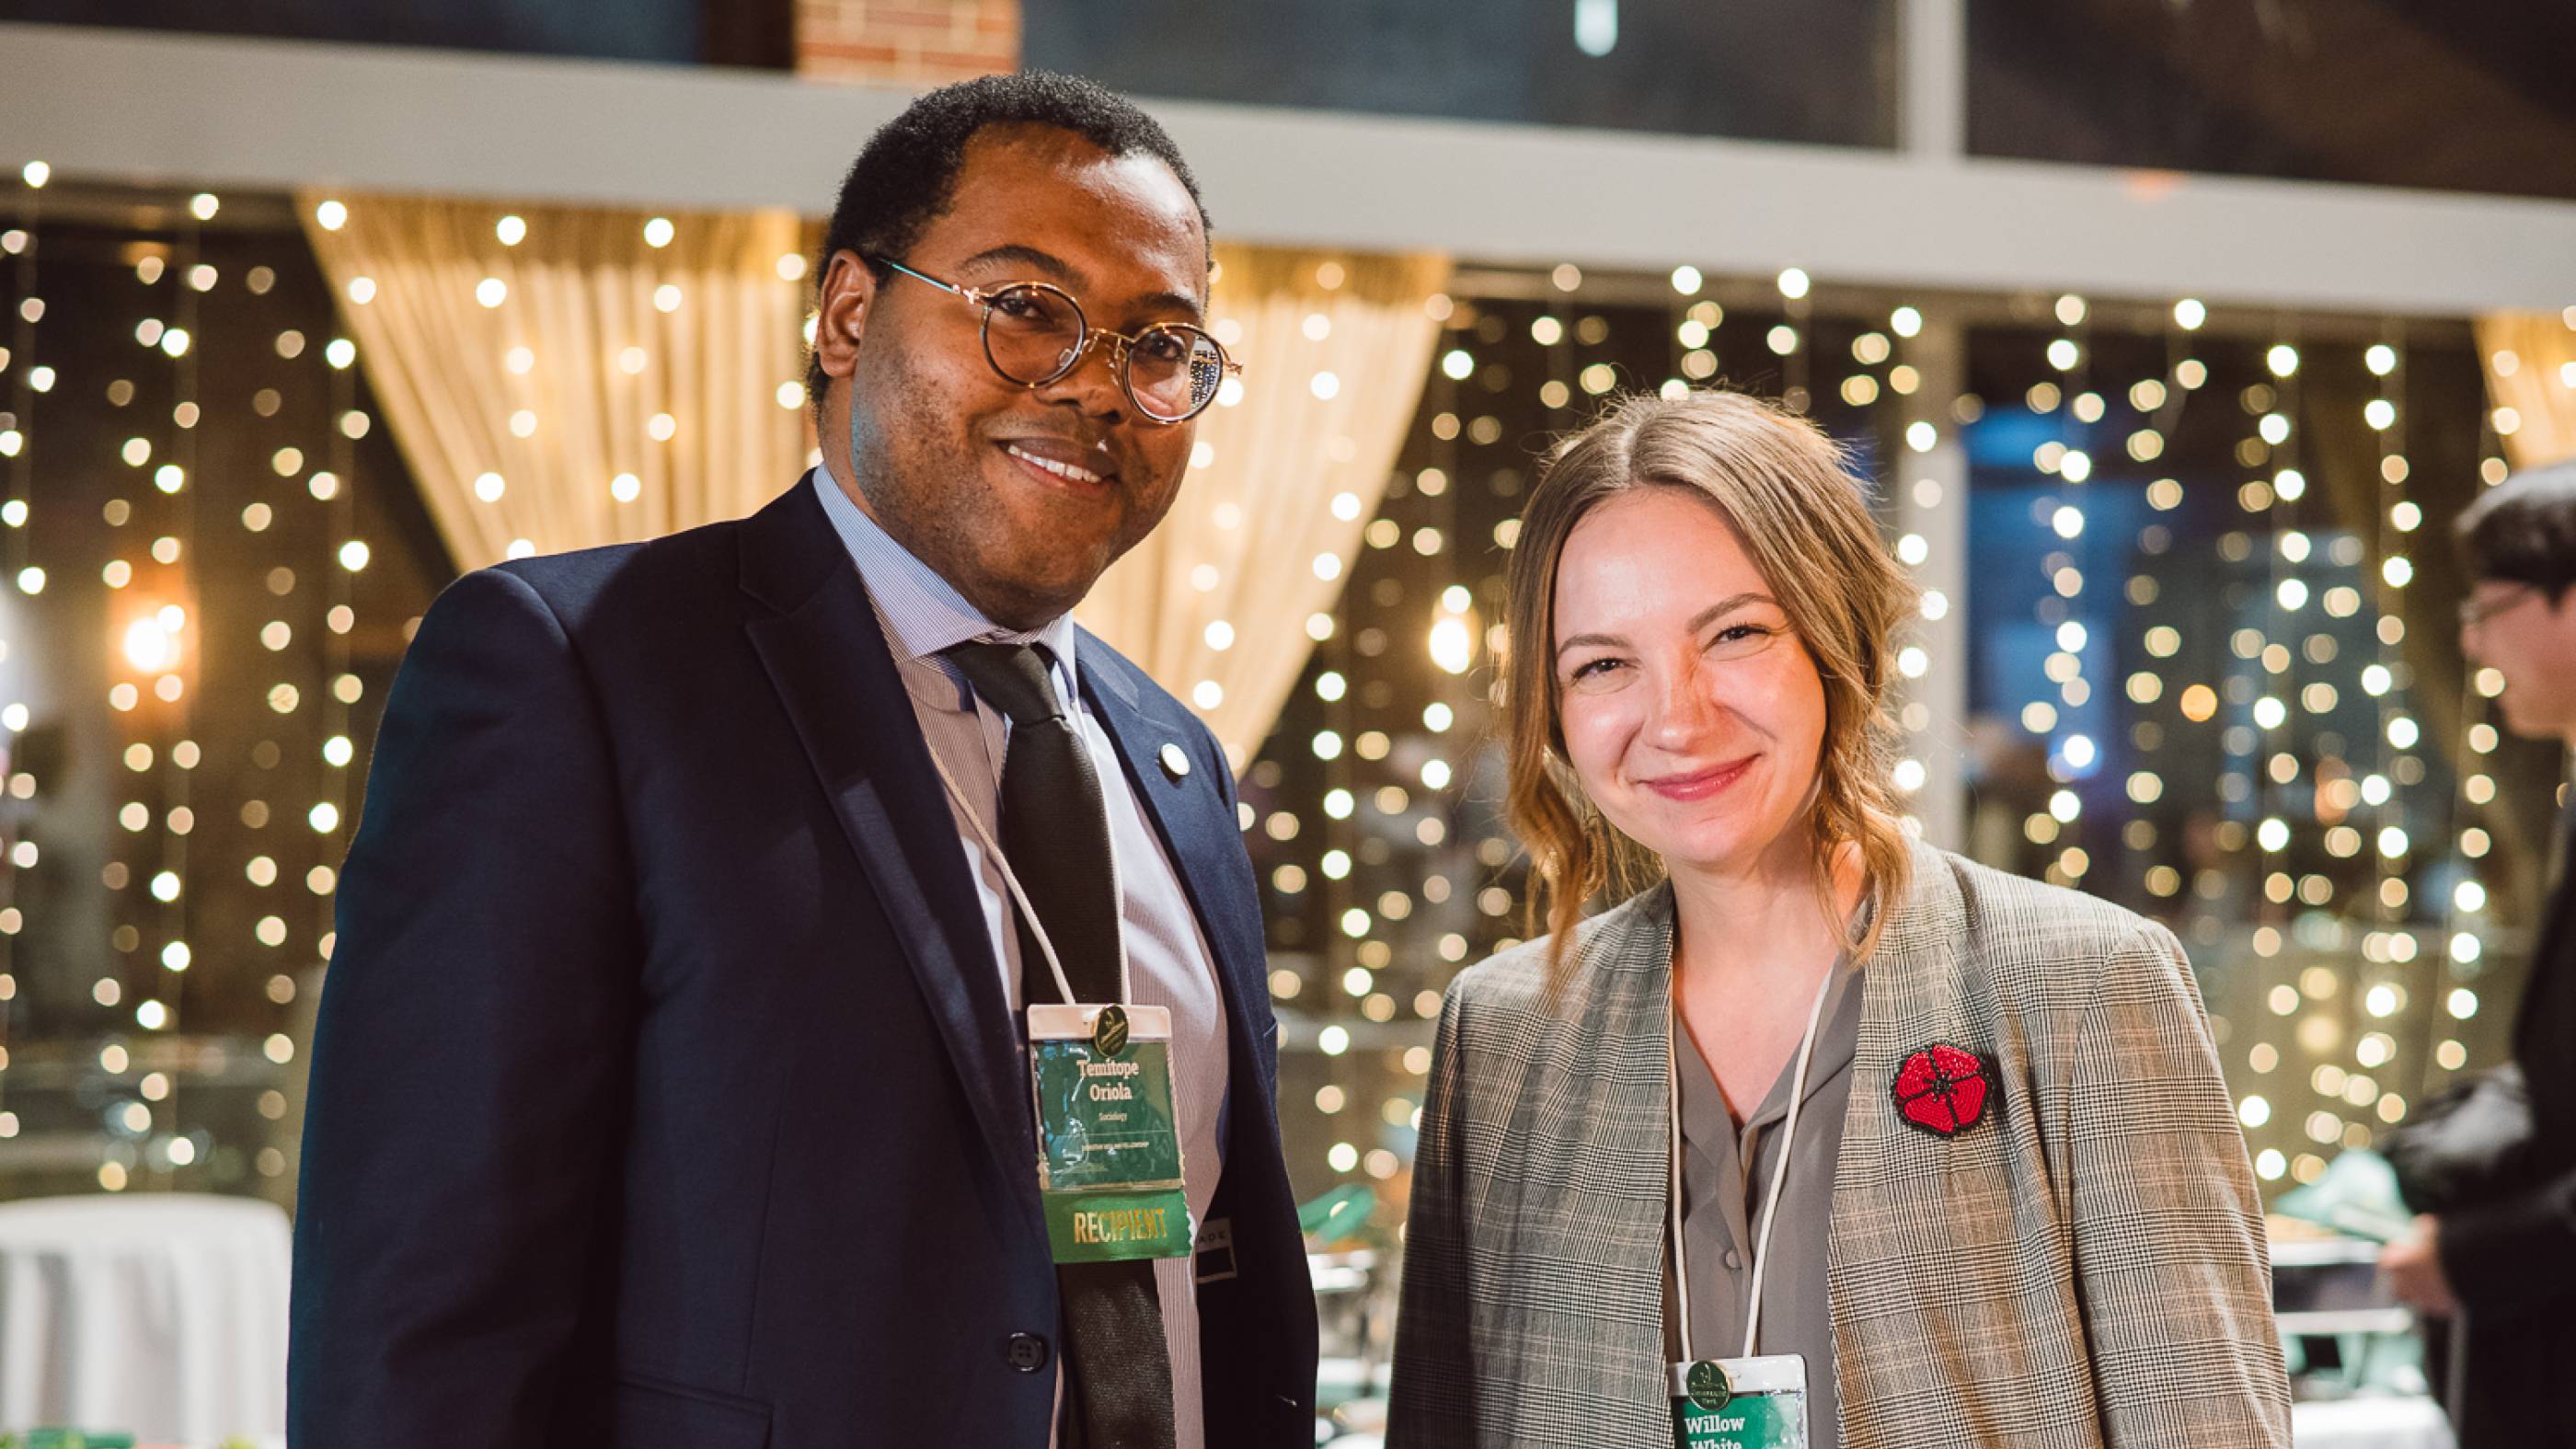  Temitope Oriola (left), a recipient of the Dorothy Killam Fellowship and Willow White (right) a winner of the Provost’s Award for Early Acheivement of Excellence in Undergraduate Teaching